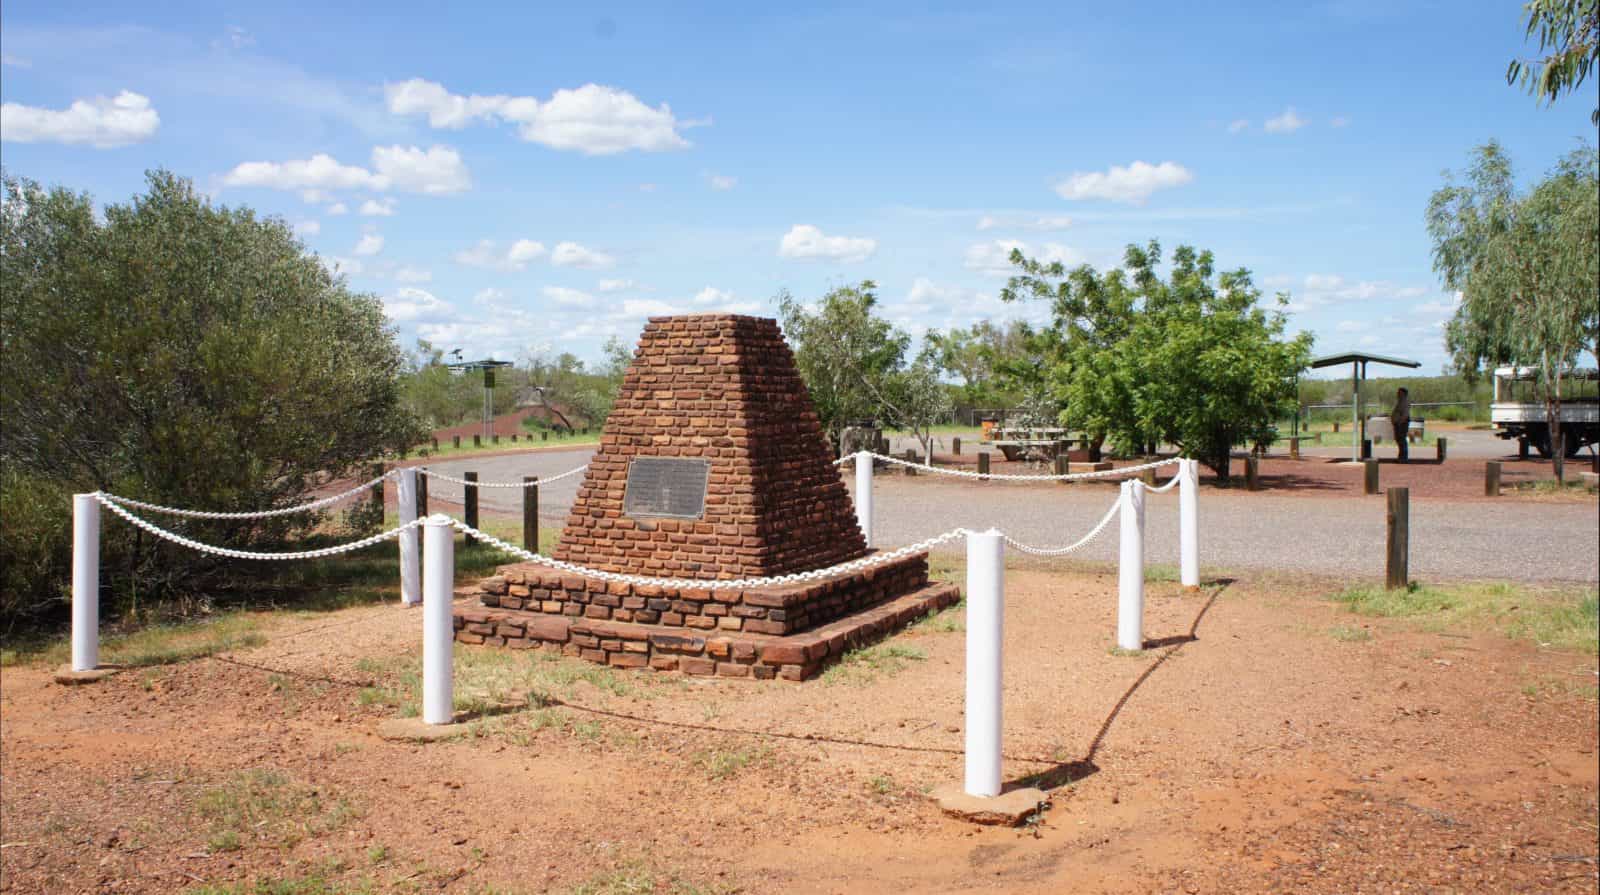 The memorial to John McDouall Stuart’s 1860 expedition to traverse the continent south to north.